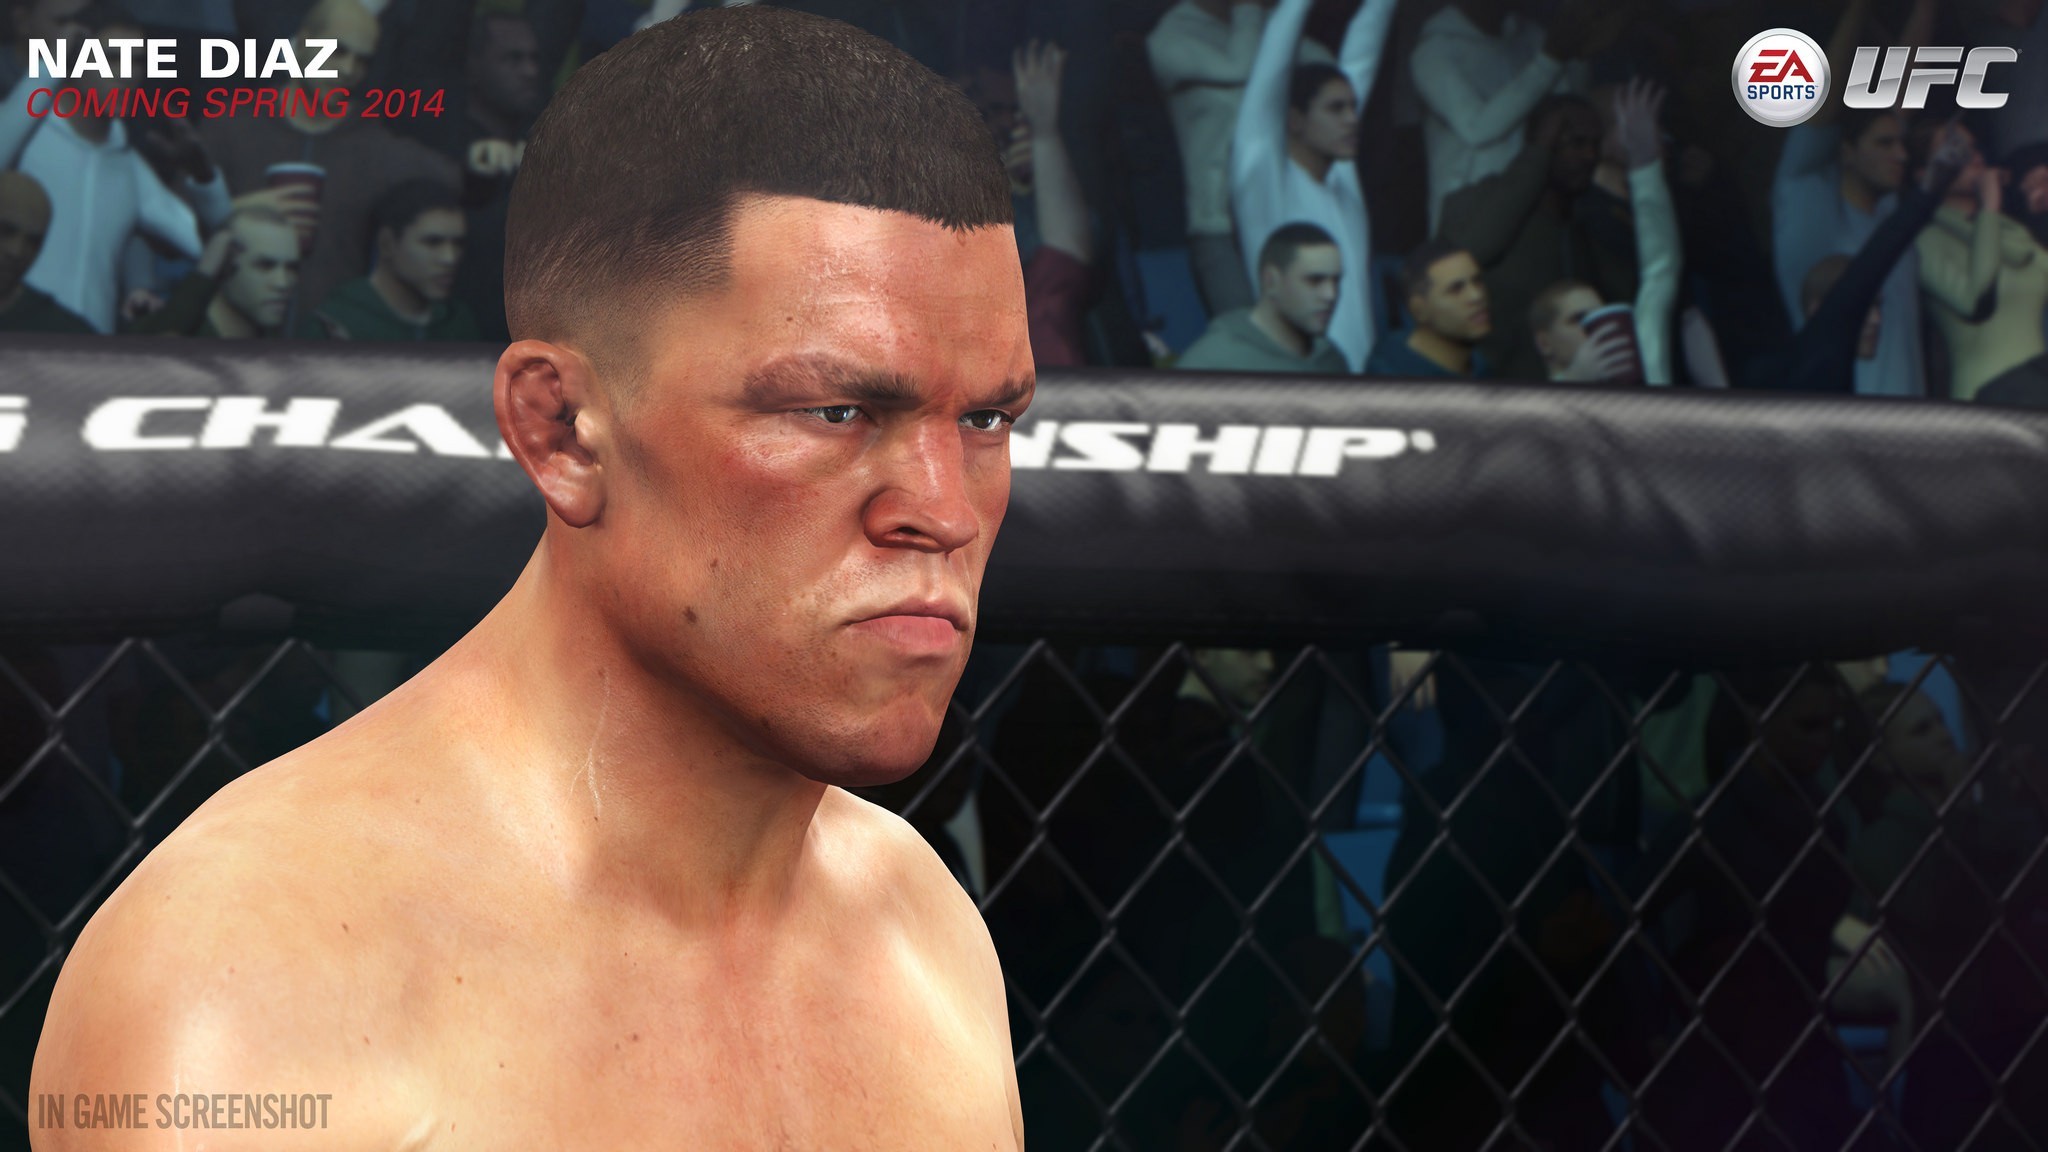 2048x1152 These feature Dominick Cruz, Josh Thomson, Ronaldo Souza and Nate Diaz.  More screenshots of other athletes in the game will be ...